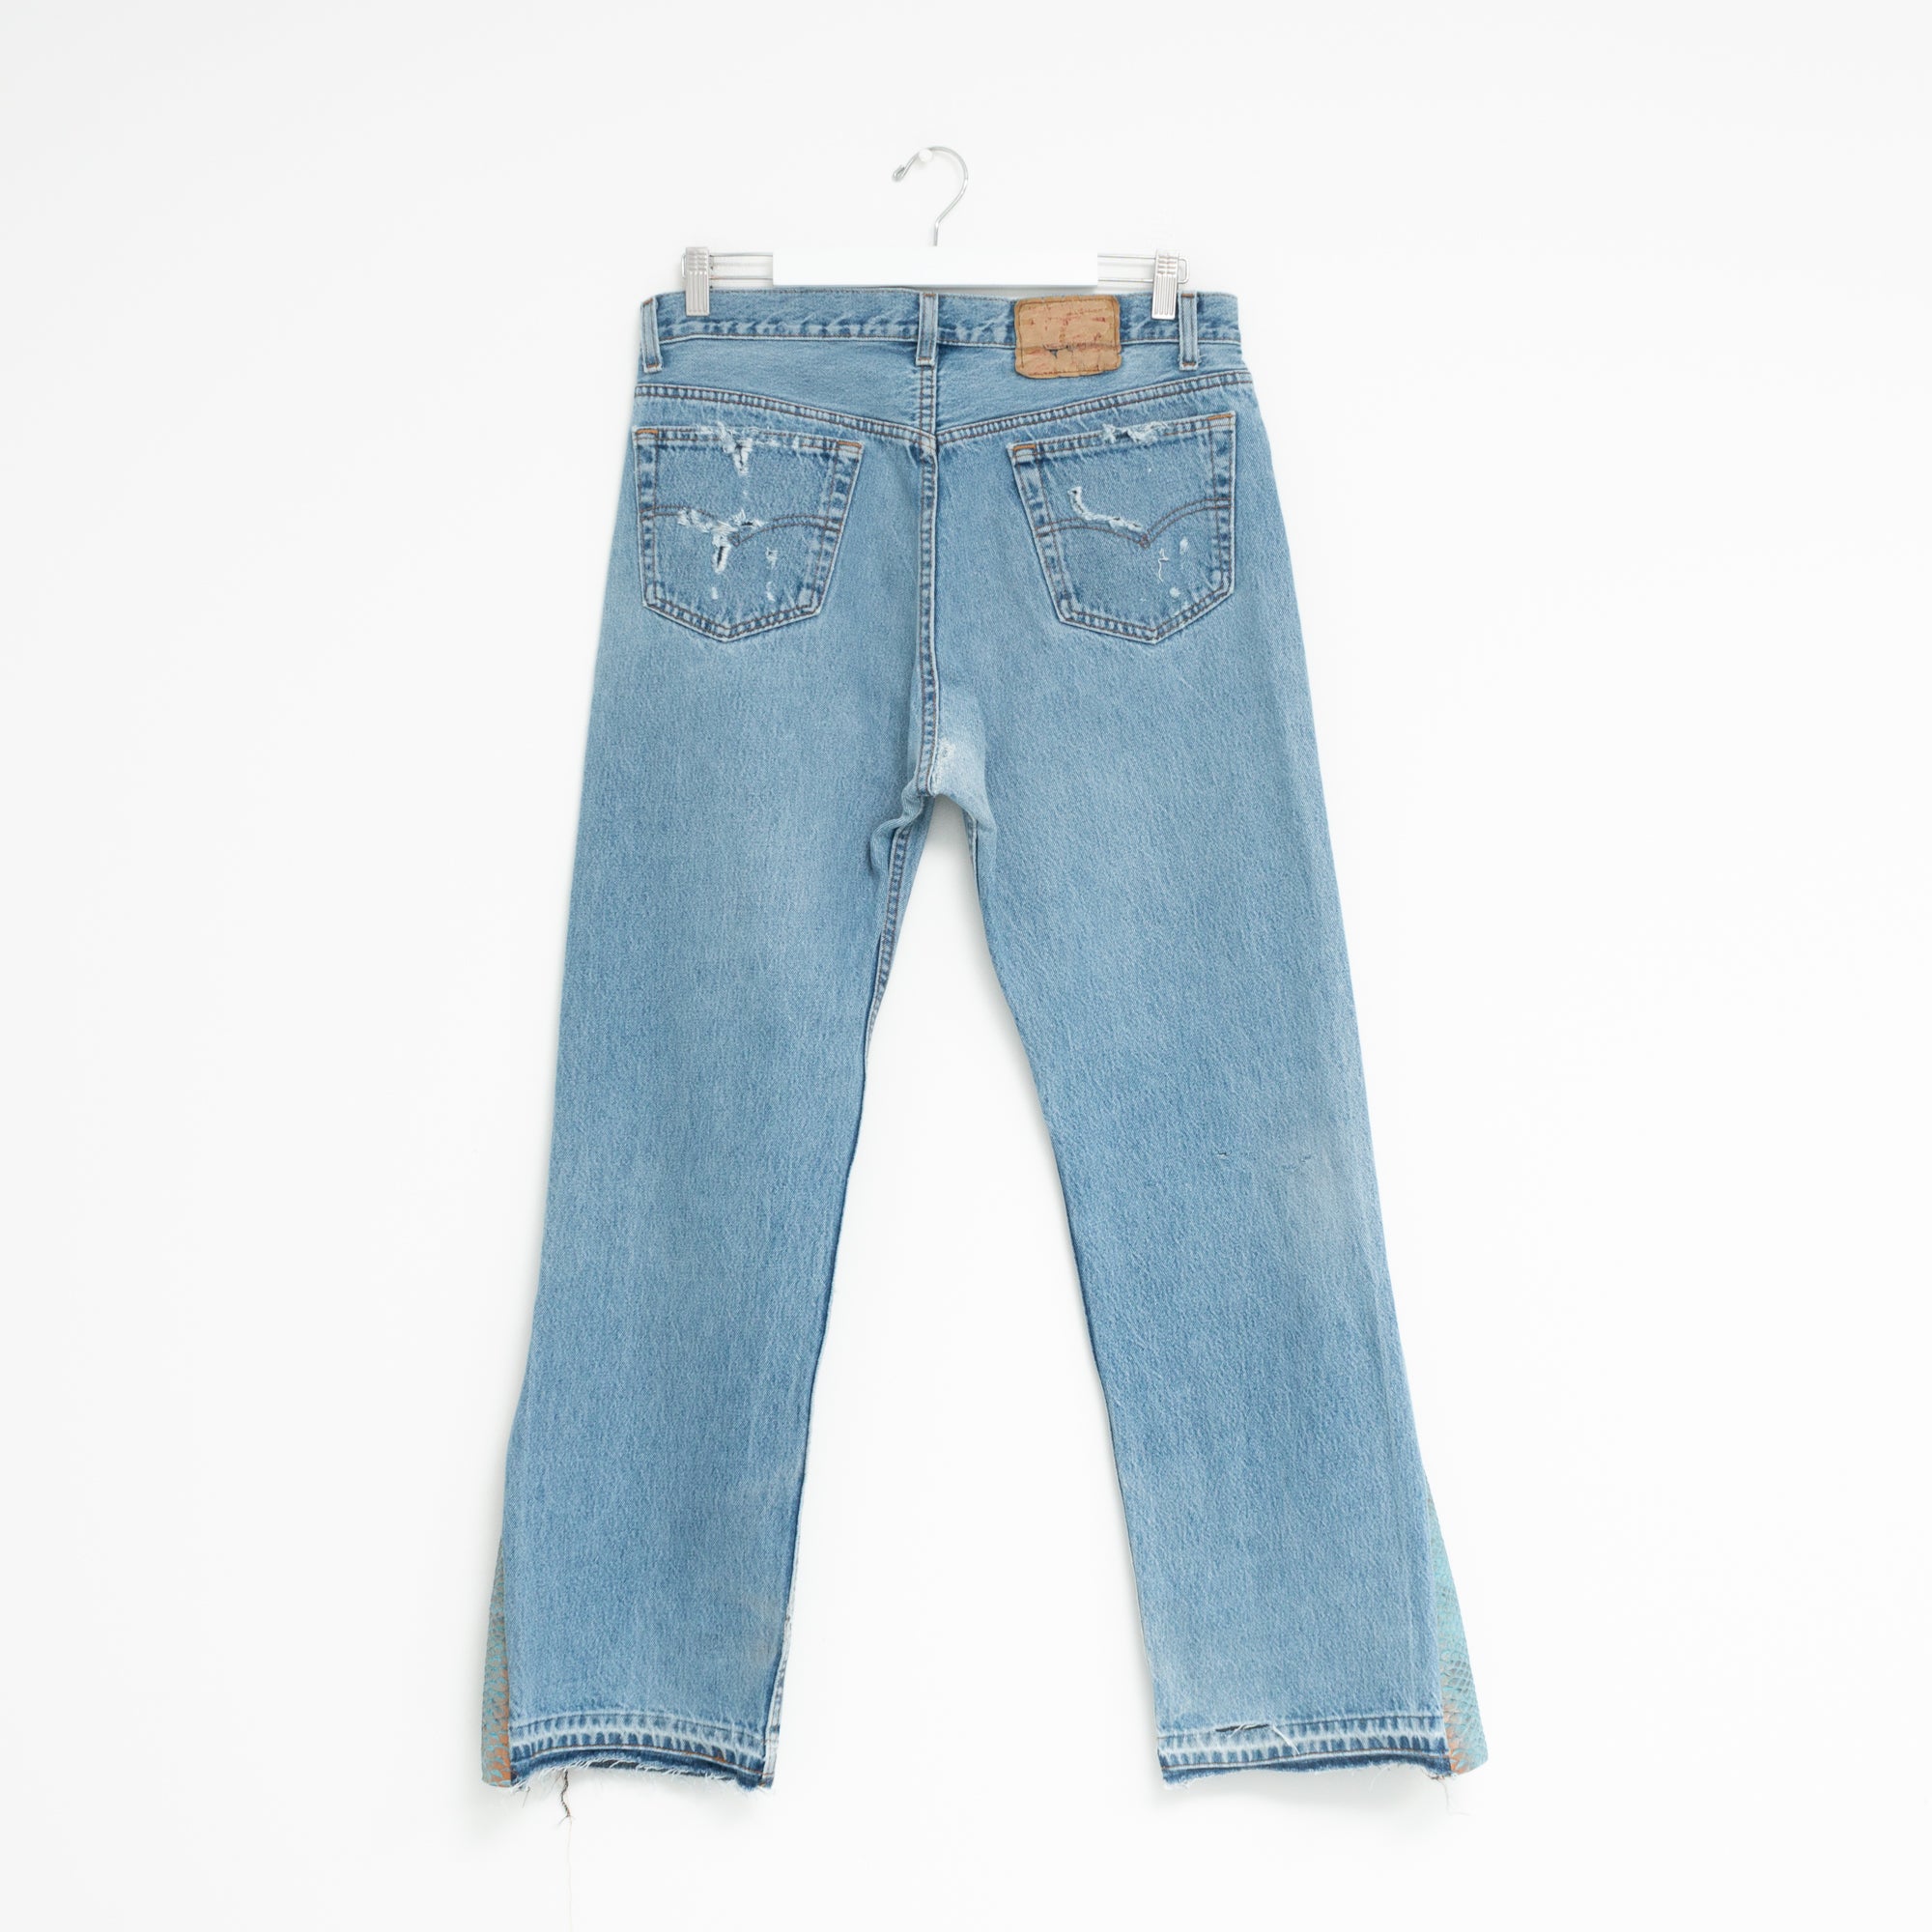 "LE FLARE" Jeans W34 L31